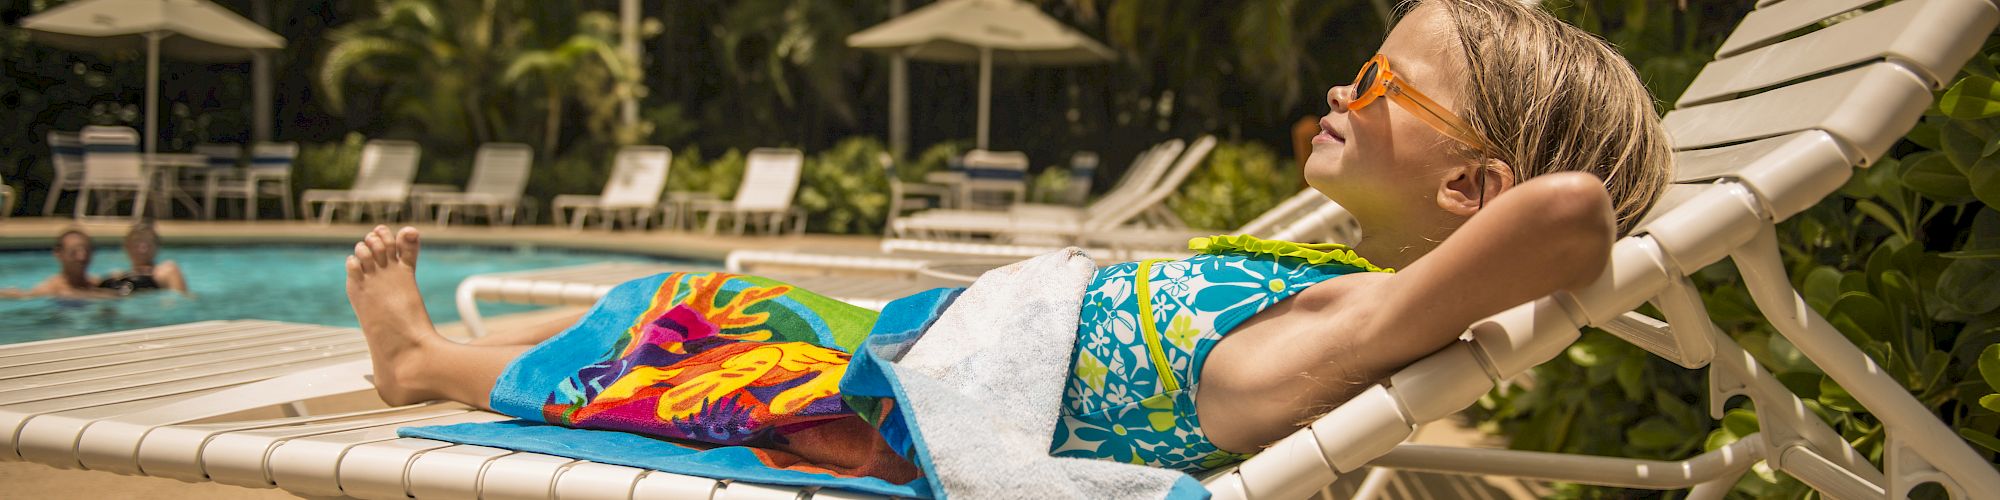 A child relaxes on a lounge chair by a pool, wearing sunglasses and wrapped in a colorful towel, surrounded by greenery and umbrellas.